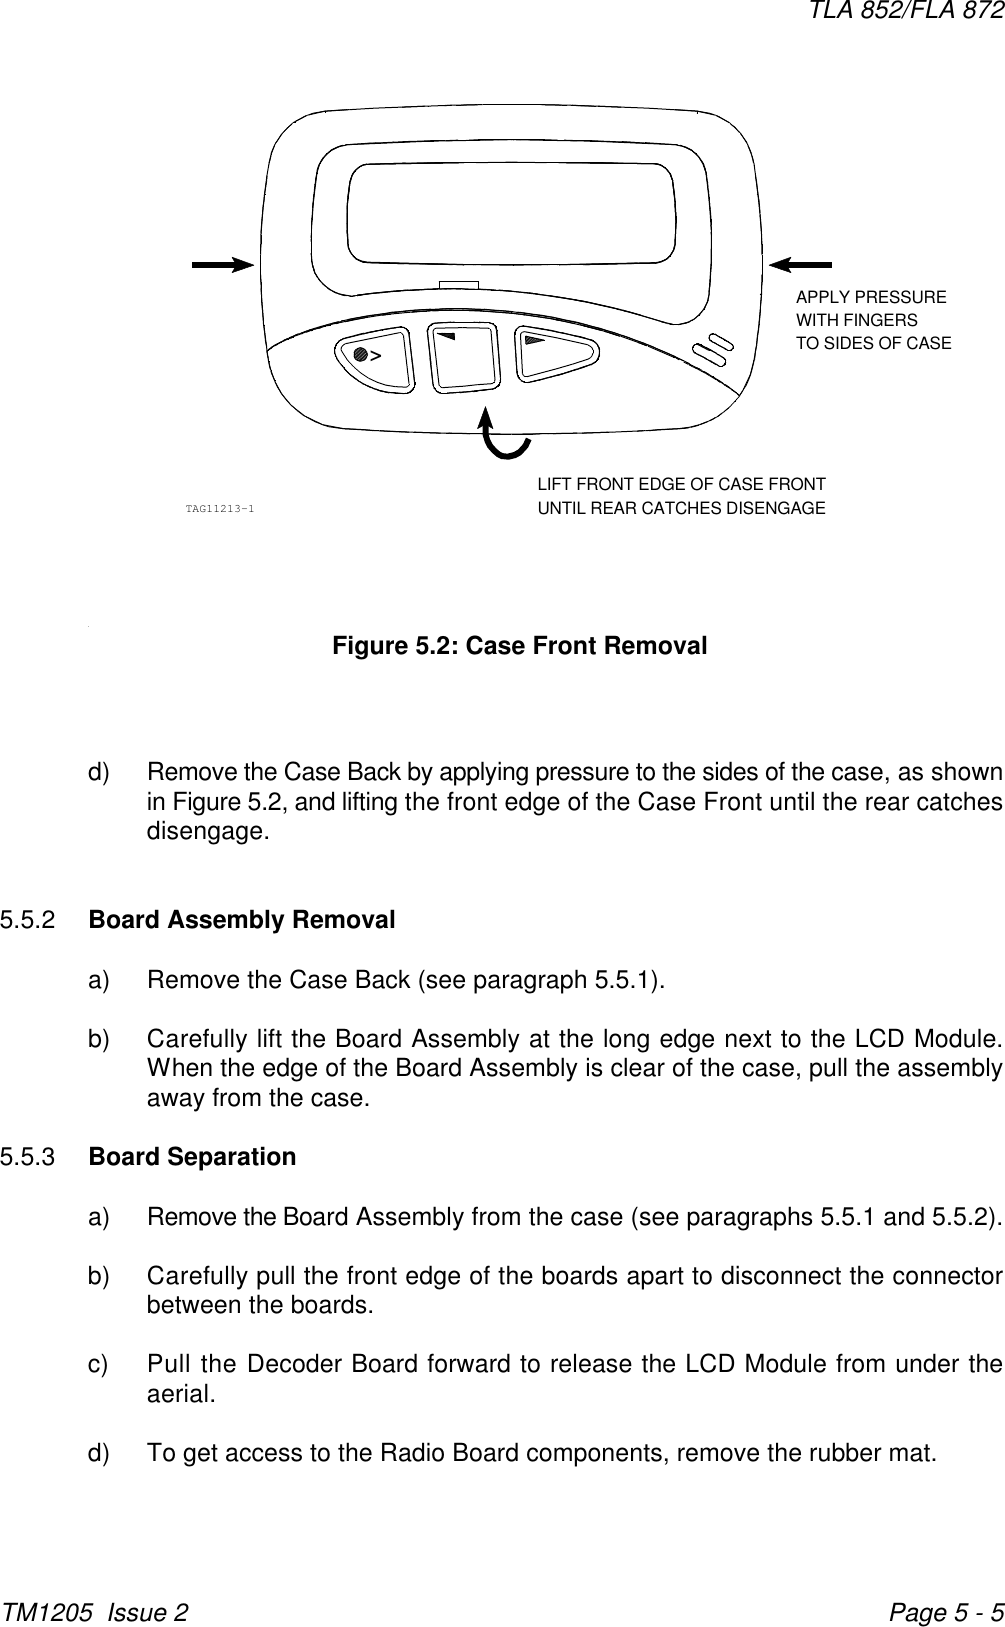 APPLY PRESSUREWITH FINGERSTO SIDES OF CASELIFT FRONT EDGE OF CASE FRONTUNTIL REAR CATCHES DISENGAGETAG11213-1&gt;TLA 852/FLA 872TM1205  Issue 2 Page 5 - 5Figure 5.2: Case Front Removald) Remove the Case Back by applying pressure to the sides of the case, as shownin Figure 5.2, and lifting the front edge of the Case Front until the rear catchesdisengage.5.5.2 Board Assembly Removala) Remove the Case Back (see paragraph 5.5.1).b) Carefully lift the Board Assembly at the long edge next to the LCD Module.When the edge of the Board Assembly is clear of the case, pull the assemblyaway from the case.5.5.3 Board Separationa) Remove the Board Assembly from the case (see paragraphs 5.5.1 and 5.5.2).b) Carefully pull the front edge of the boards apart to disconnect the connectorbetween the boards.c) Pull the Decoder Board forward to release the LCD Module from under theaerial.d) To get access to the Radio Board components, remove the rubber mat.